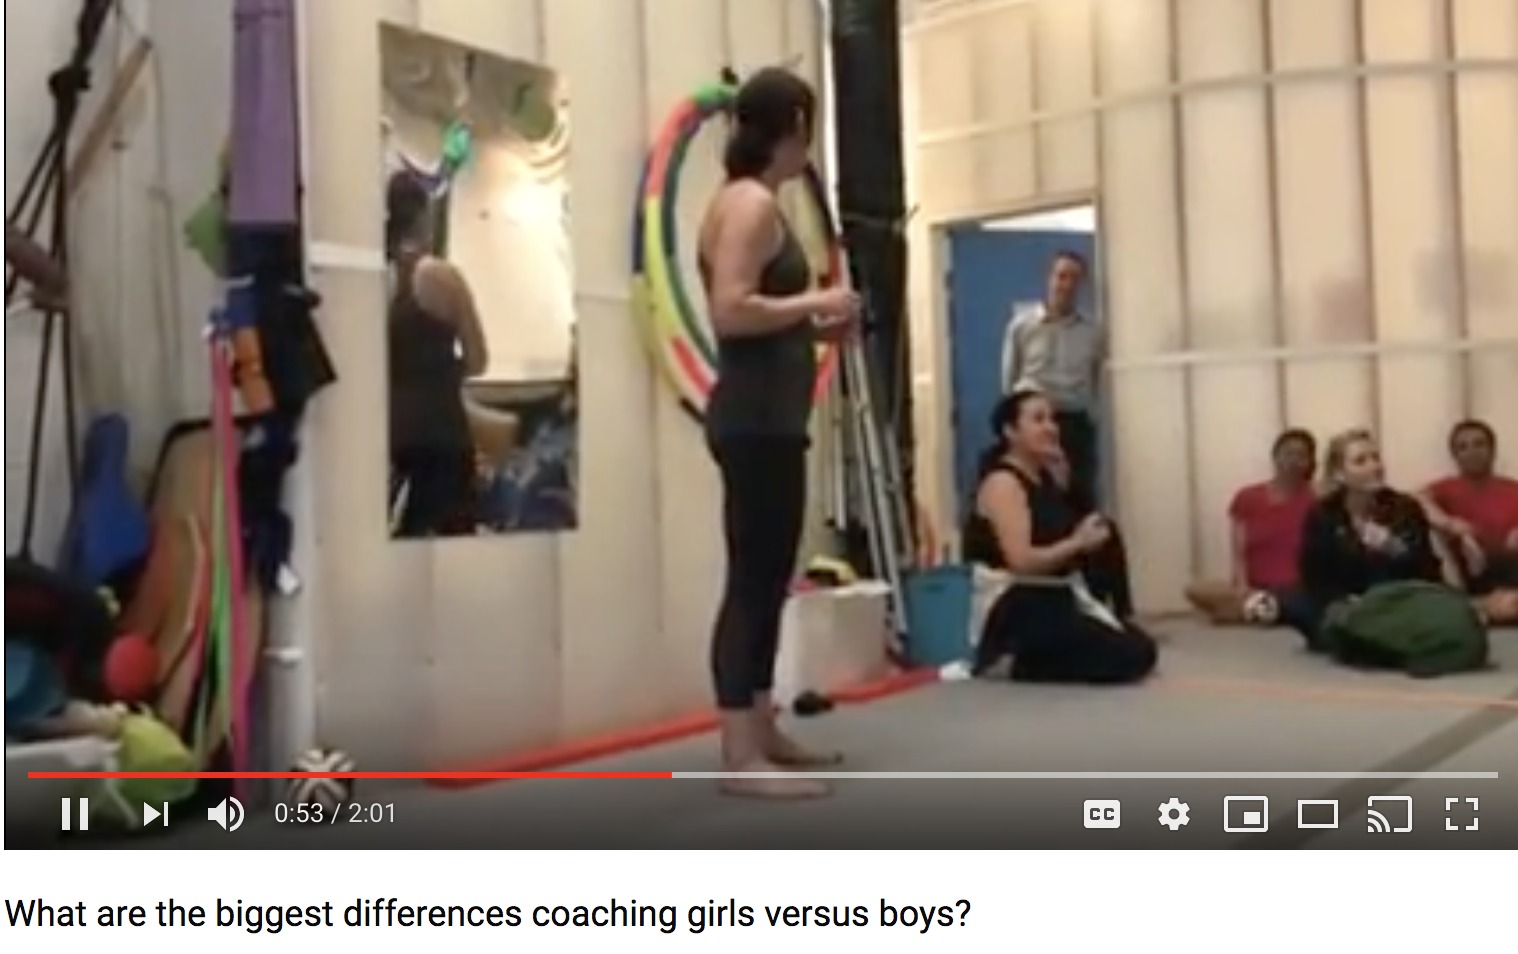 What are the biggest differences coaching girls versus boys?